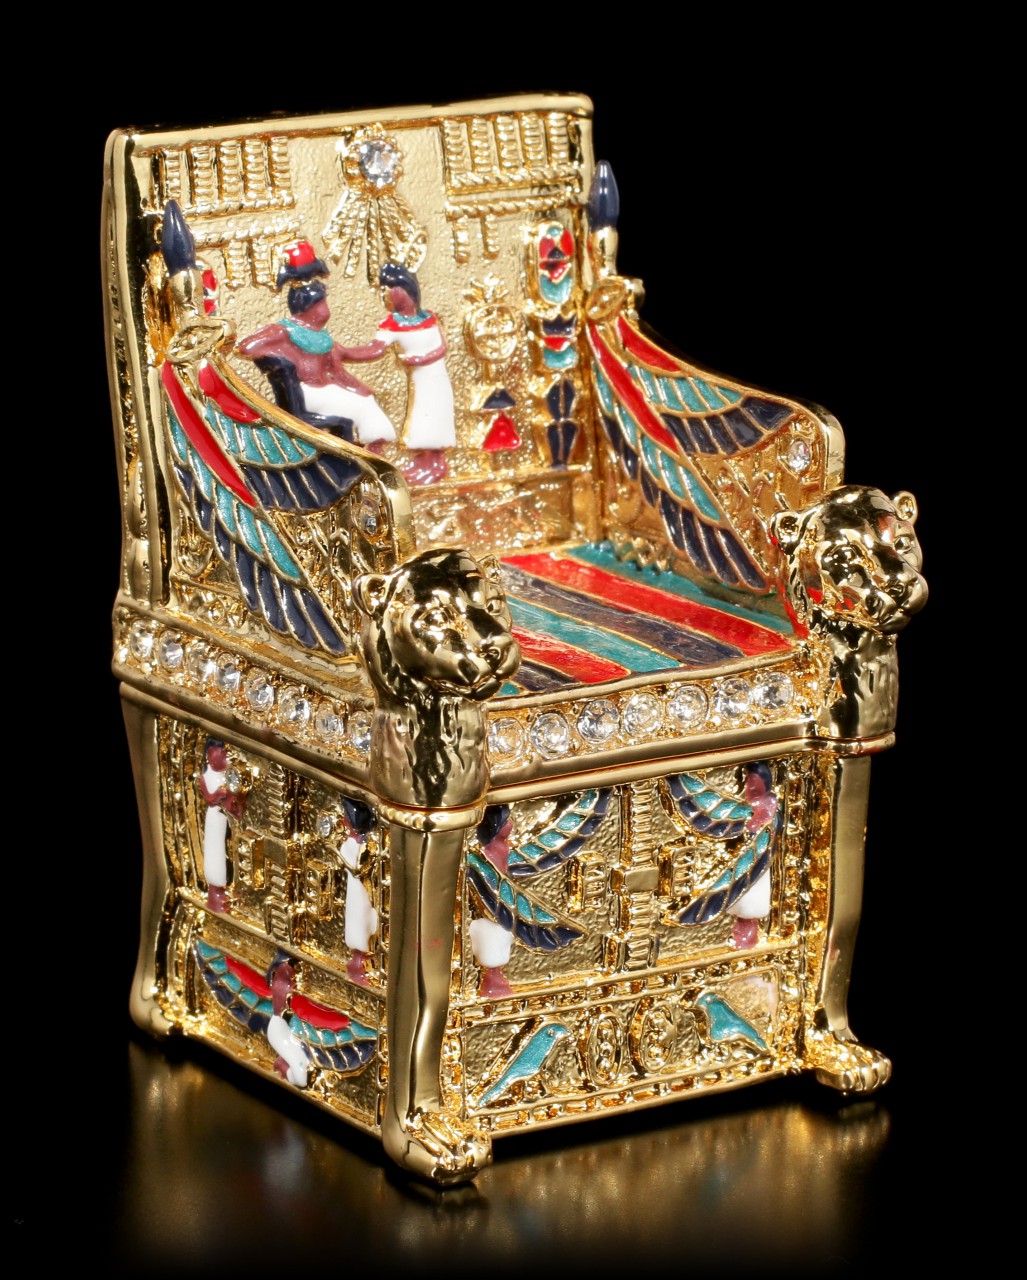 Small Egyptian Box - Throne gold colored